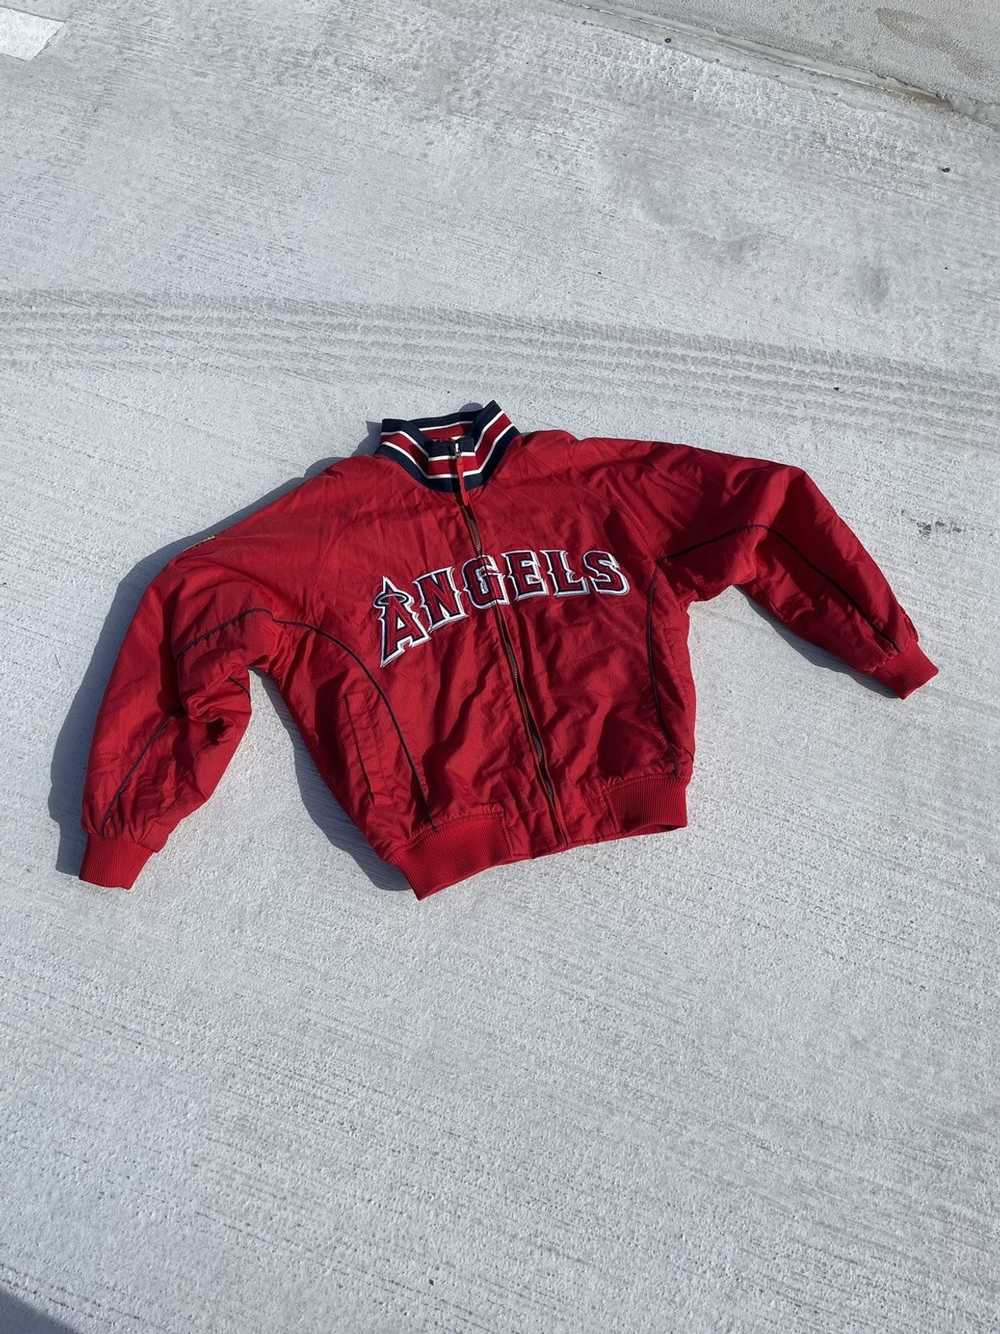  Majestic Cooperstown Retro Wicking Replica Jersey Los Angeles  Angels (Youth Small) Navy : ספורט ופעילות בחיק הטבע